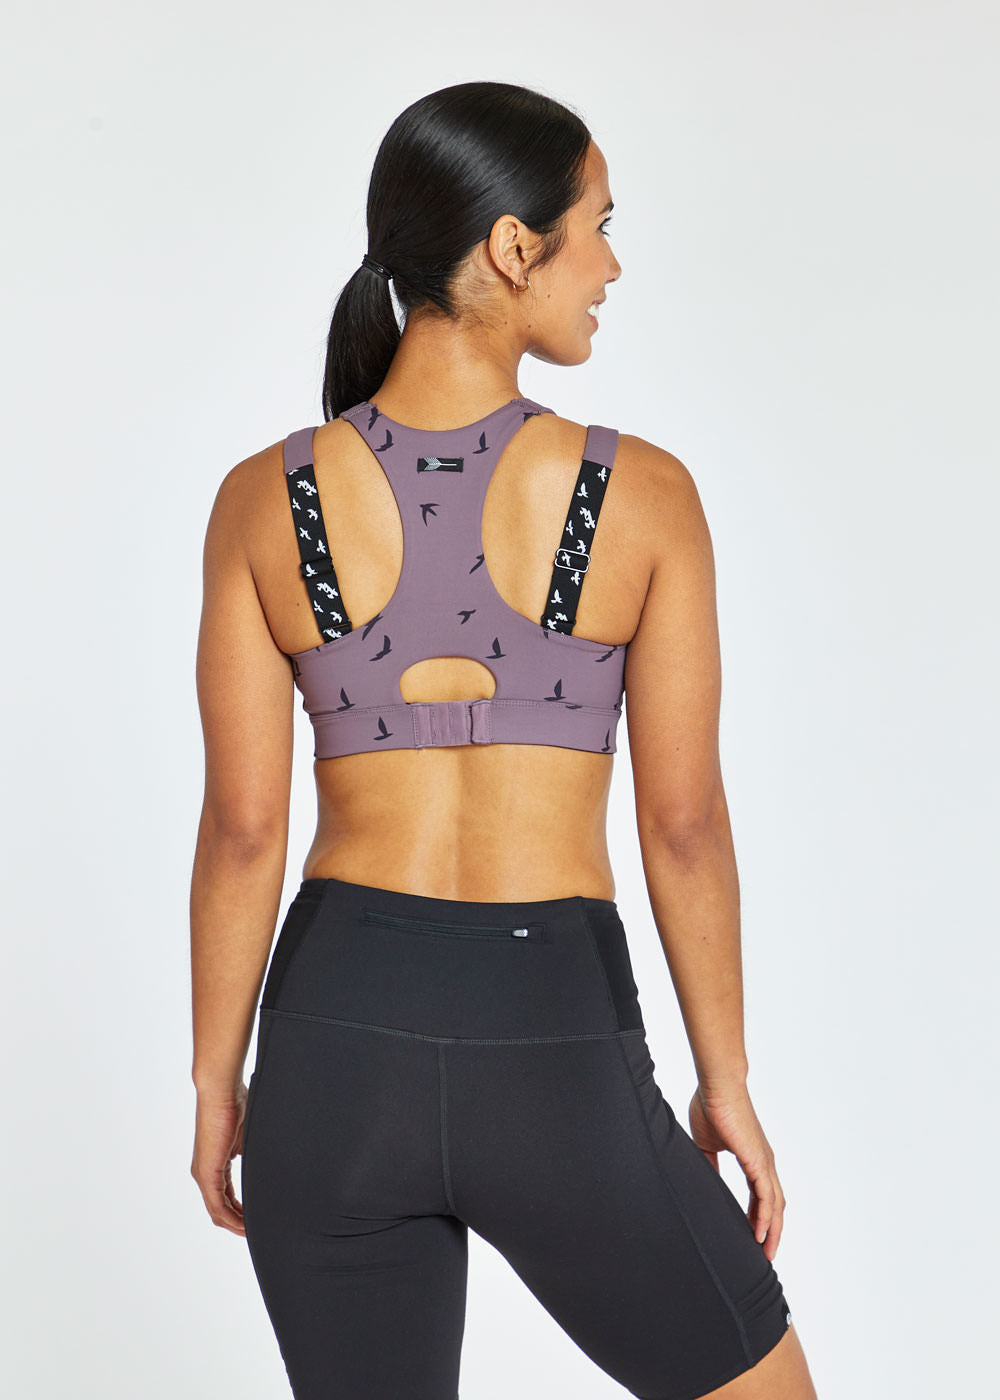 Oiselle Bras, Strong. Supportive. Ready to run!